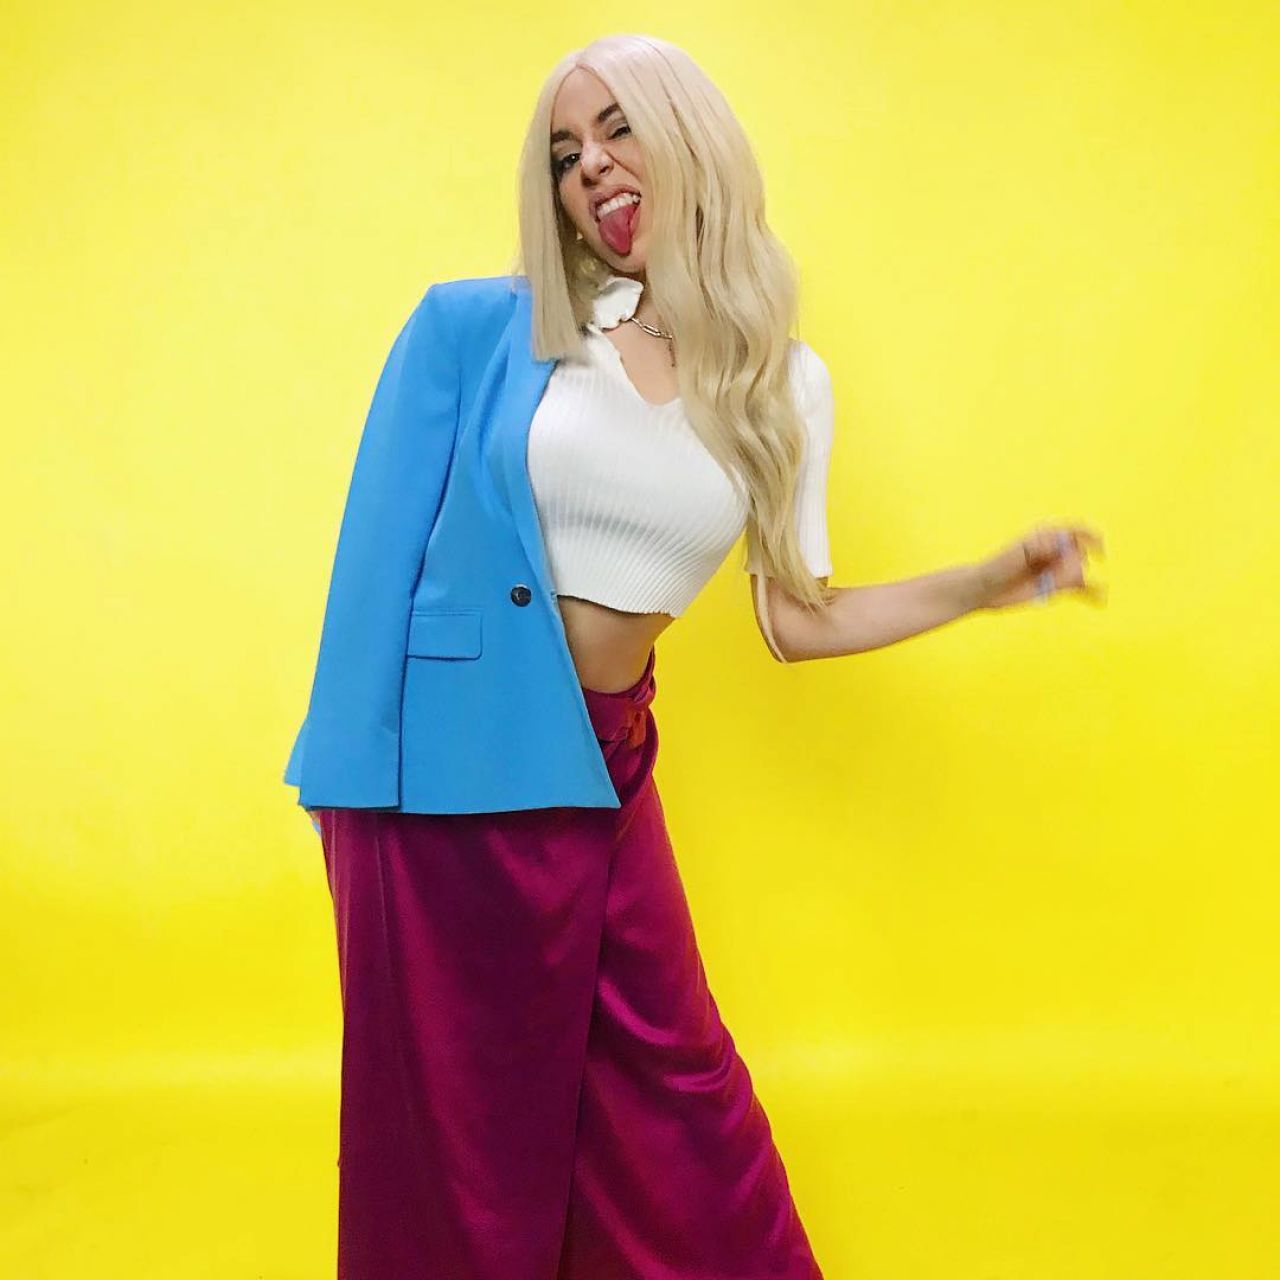 Best Ava Max Photoshoot Images